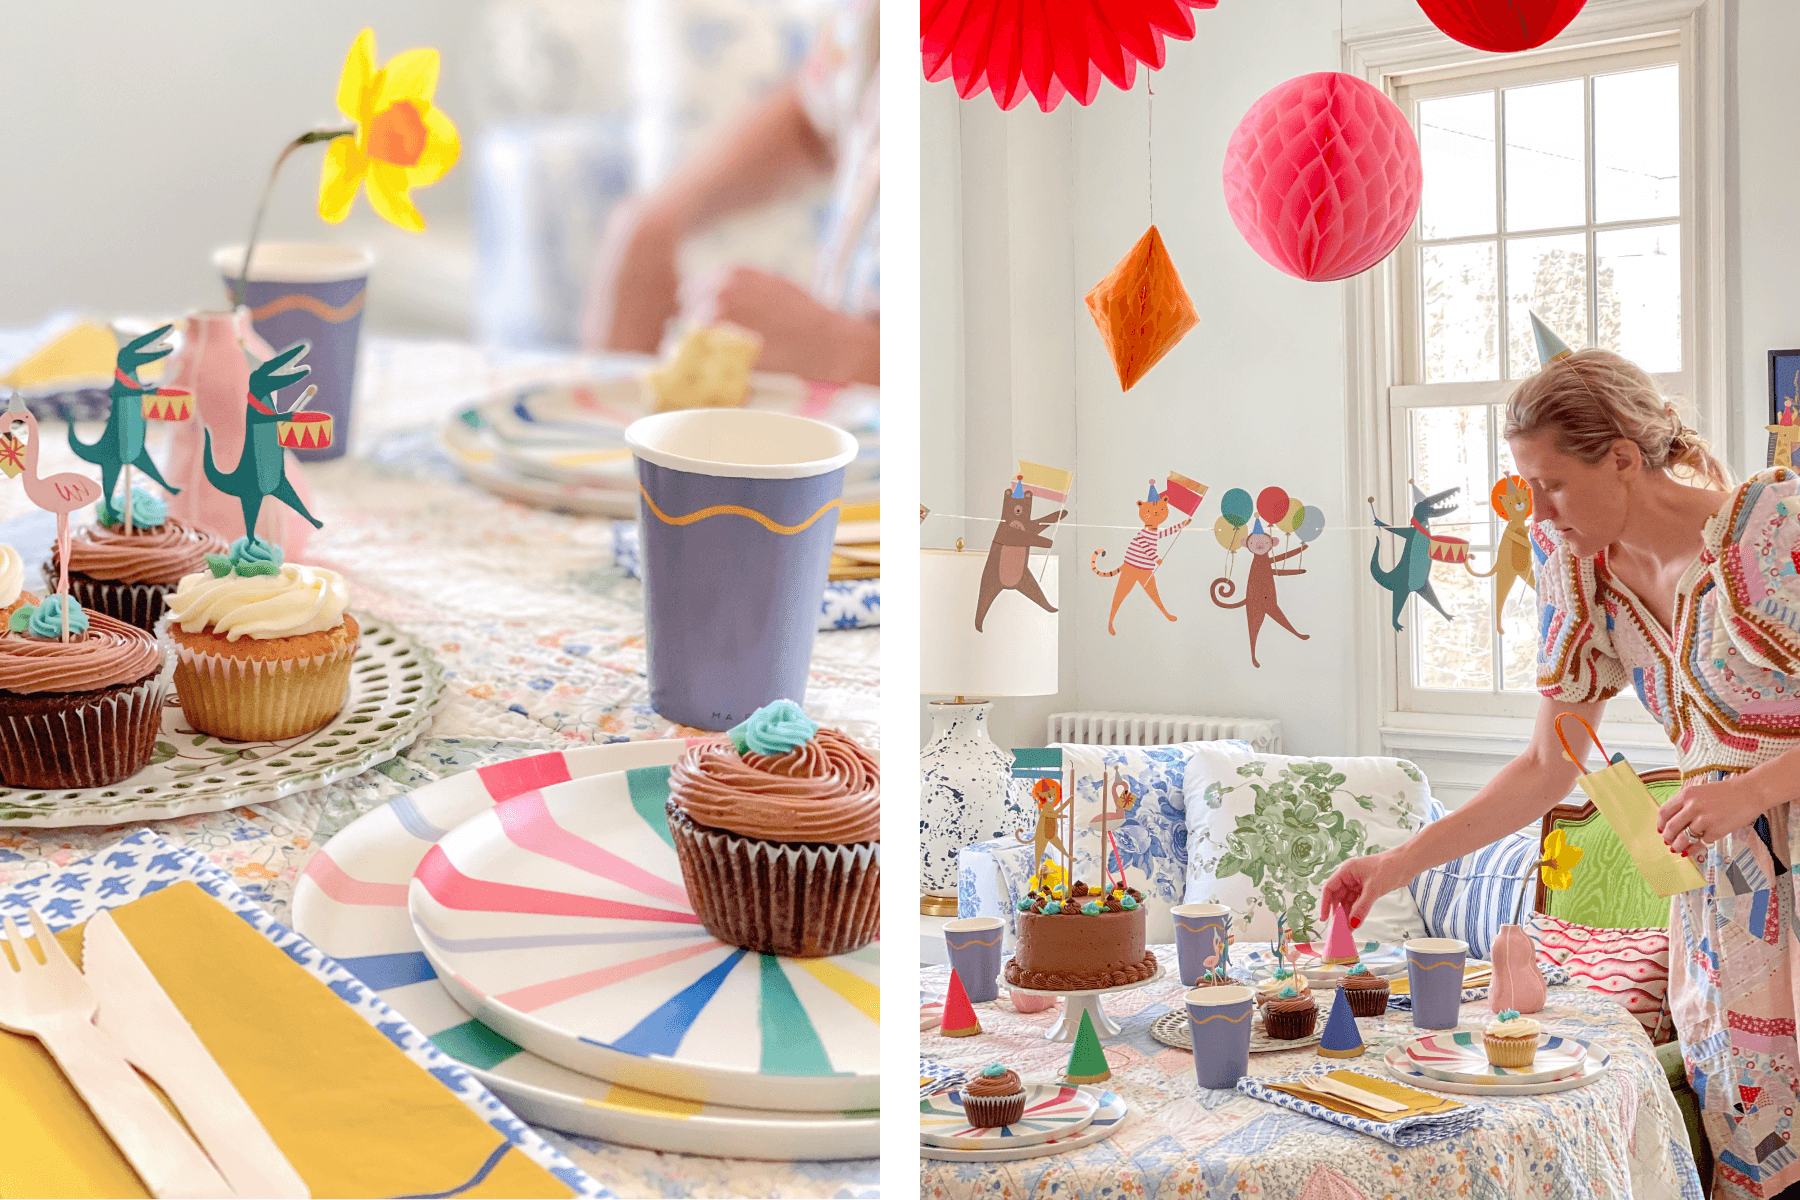 Left: Kids' birthday party table set with rainbow and animal-themed decor. Right: Woman, Eliza Harris of Sister Parish, adds finishing touches to her kids' birthday party table featuring animal-themed decor. 